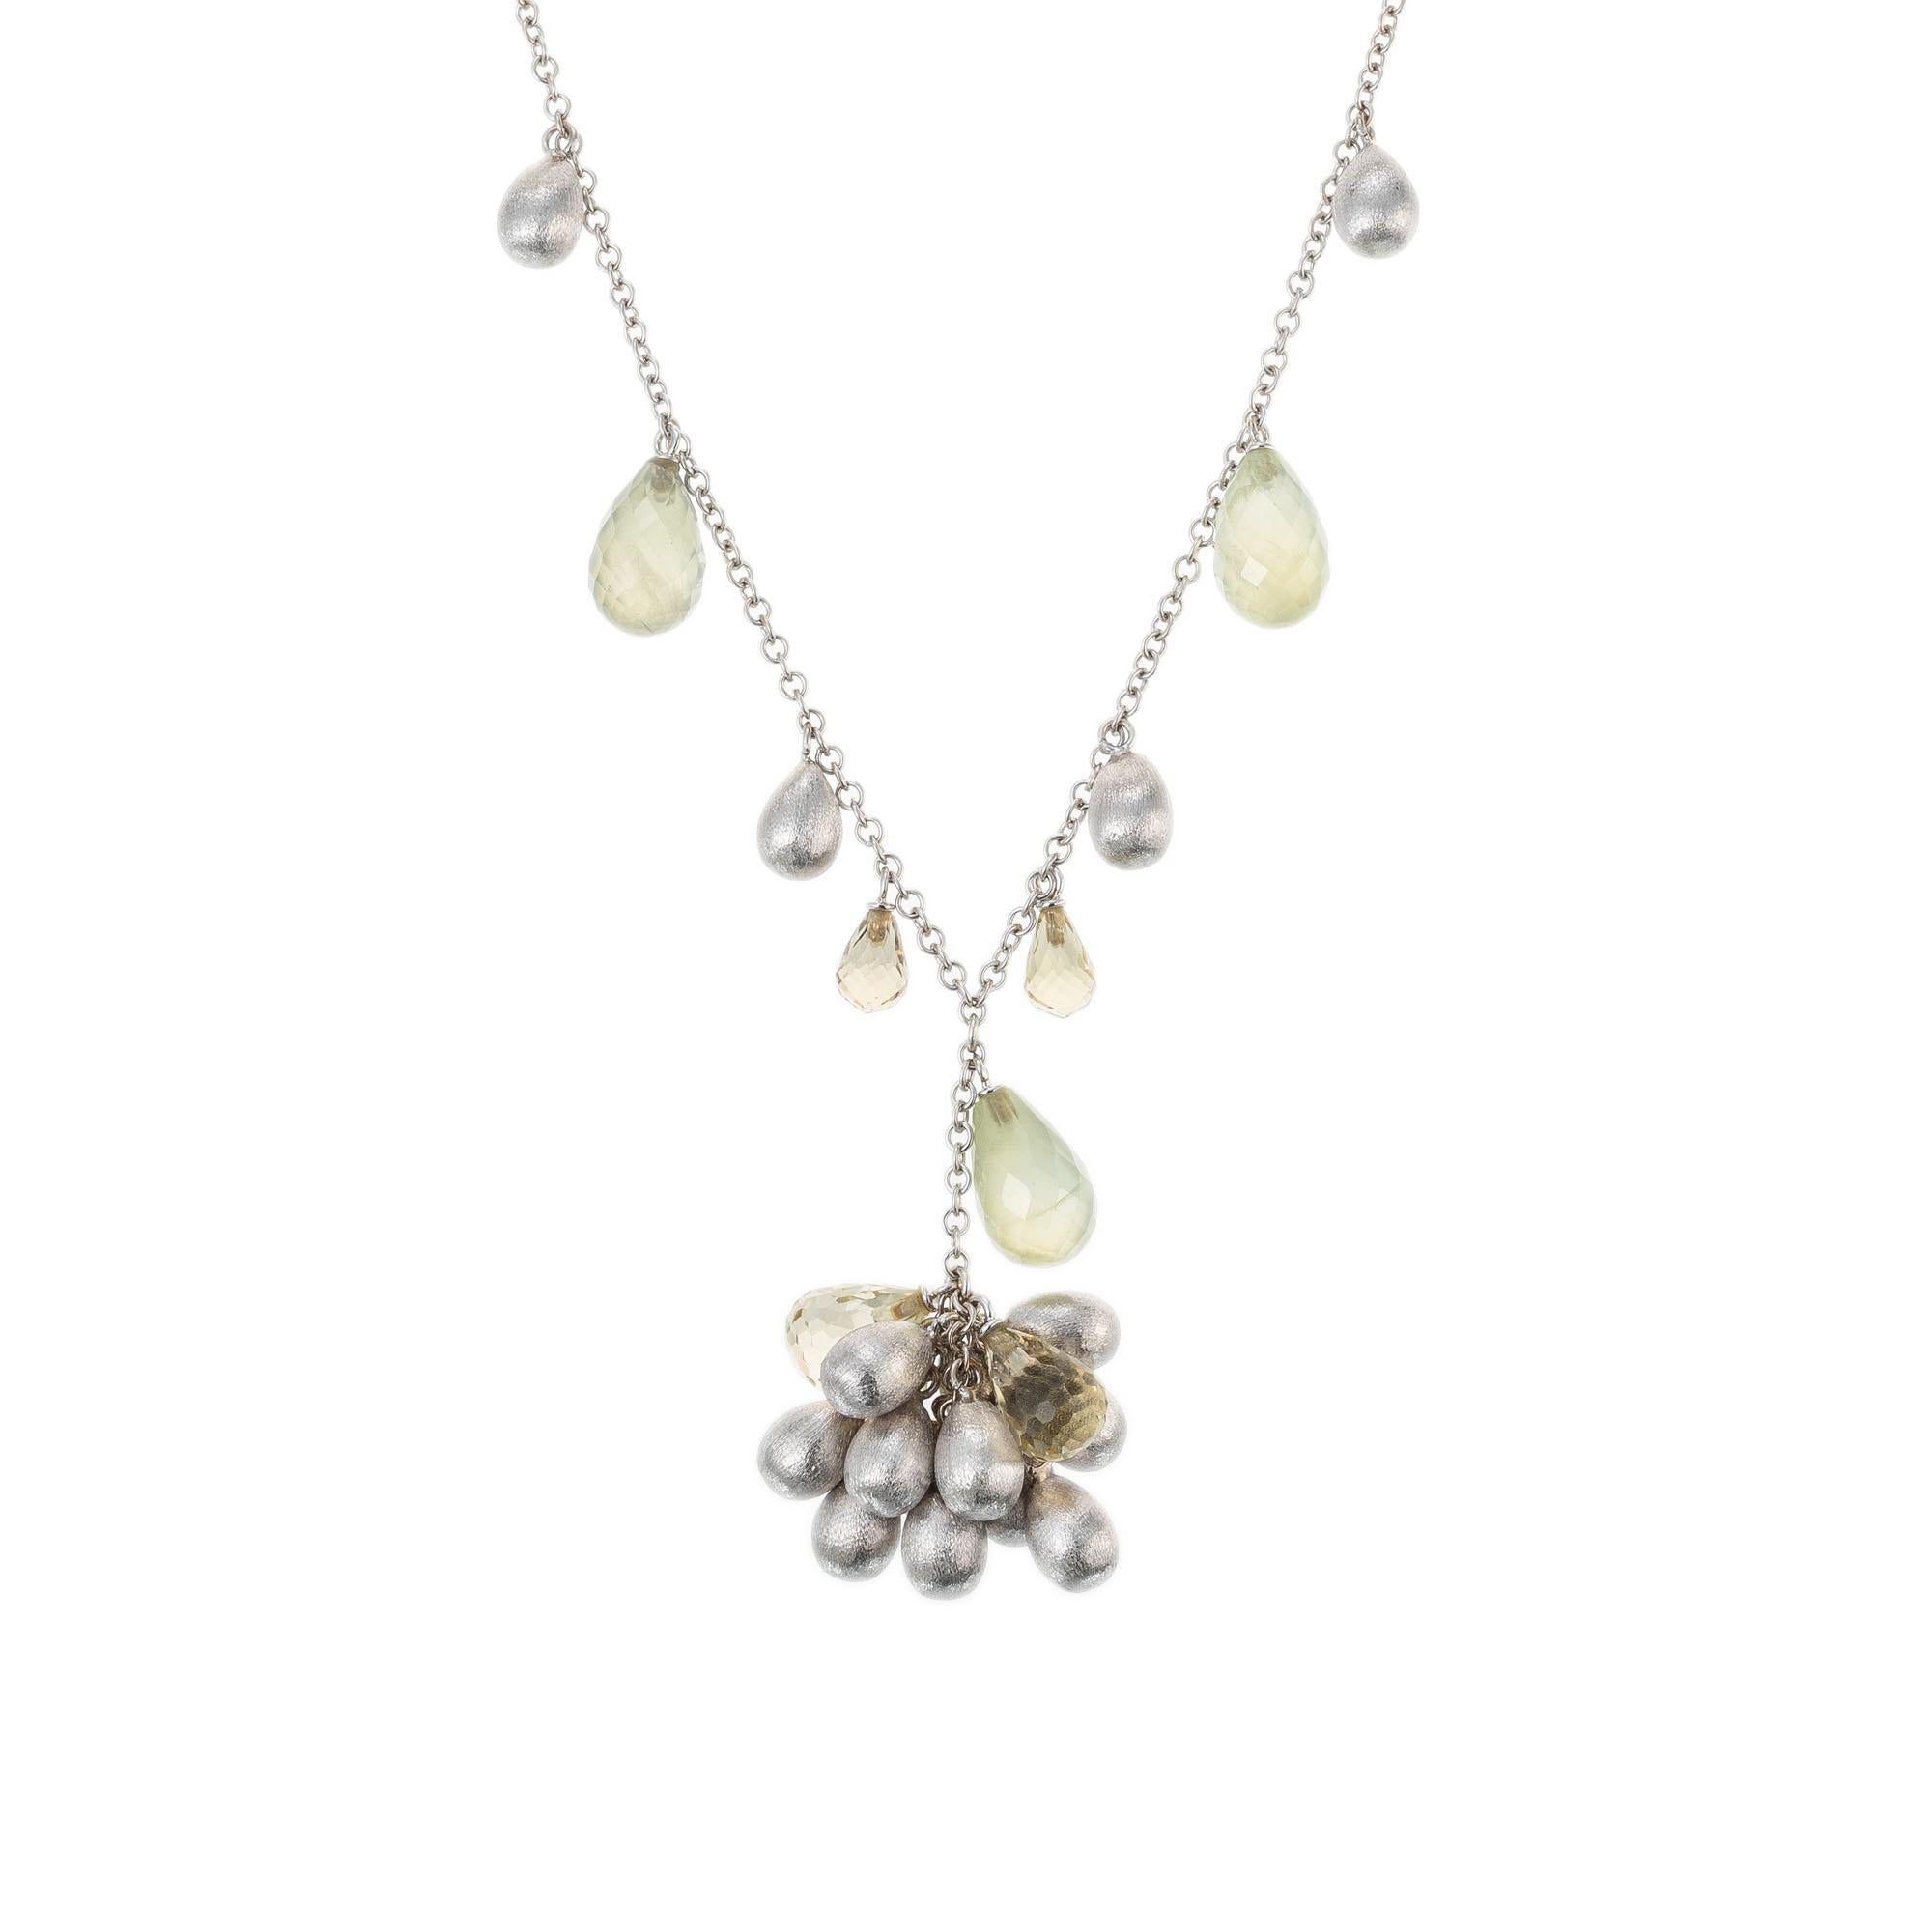 Pear shaped quartz briolette pendant necklace. 18k white gold chain with with textured white gold pear shaped drops with lemon Citrine quartz and translucent green quartz Briolette's on a  20 inch white gold chain. 

7 lemon quartz Briolette approx.